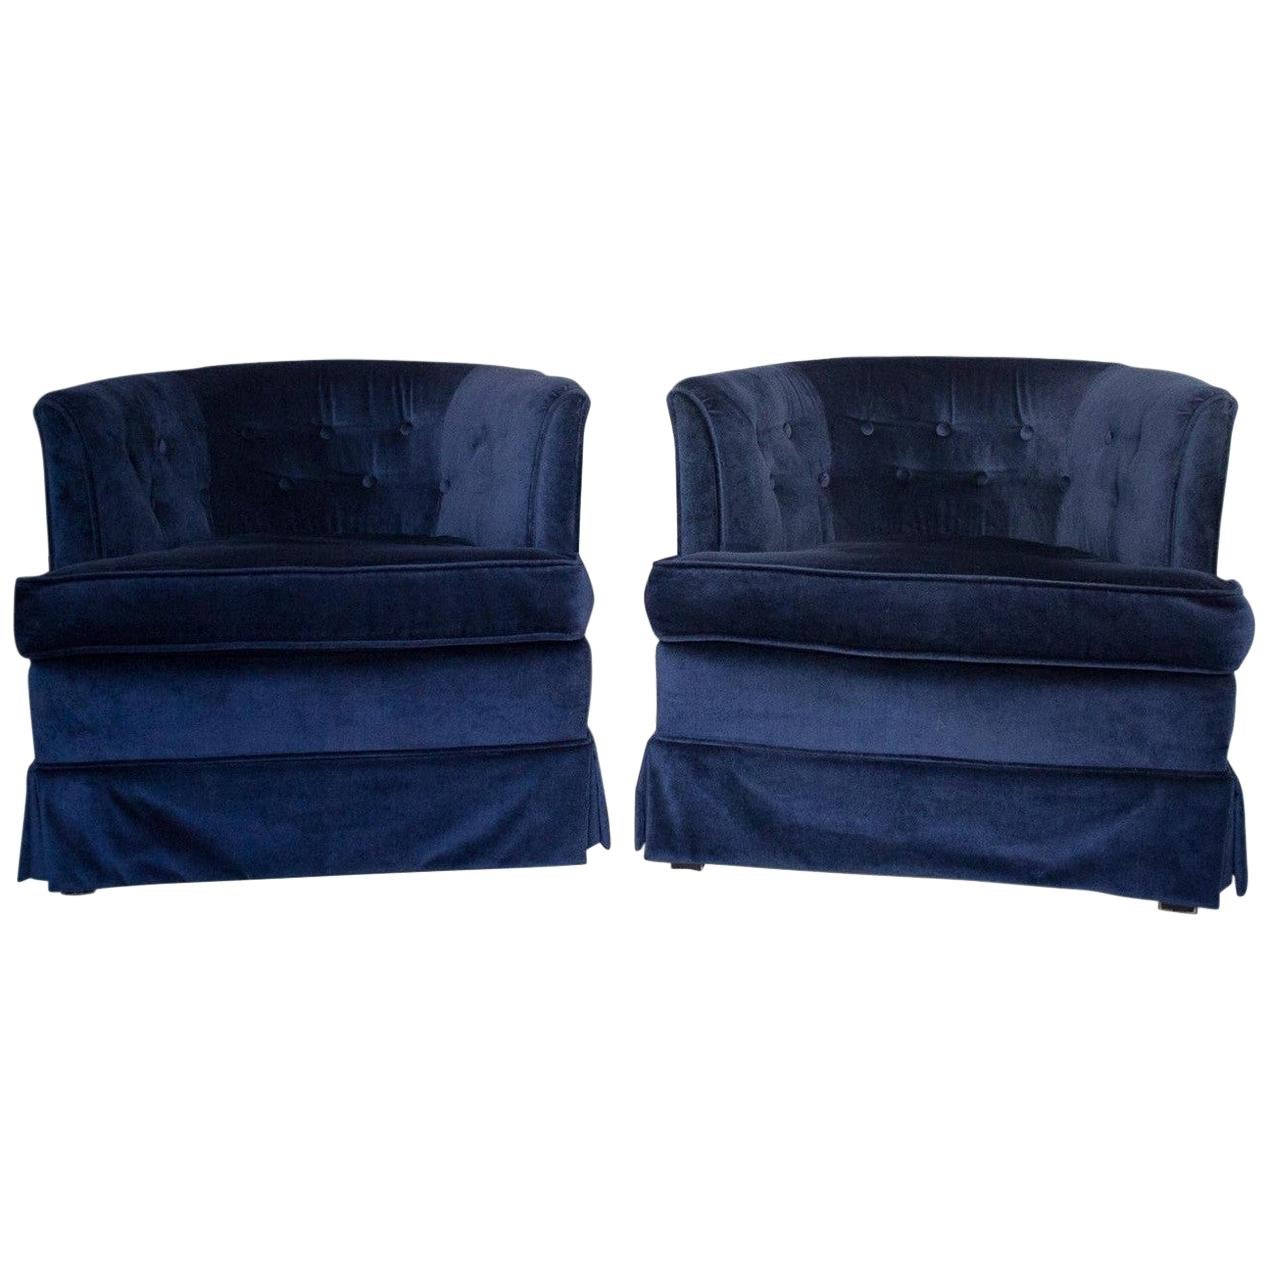 Gorgeous Pair of Luxe Navy Fully Upholstered Club Armchairs